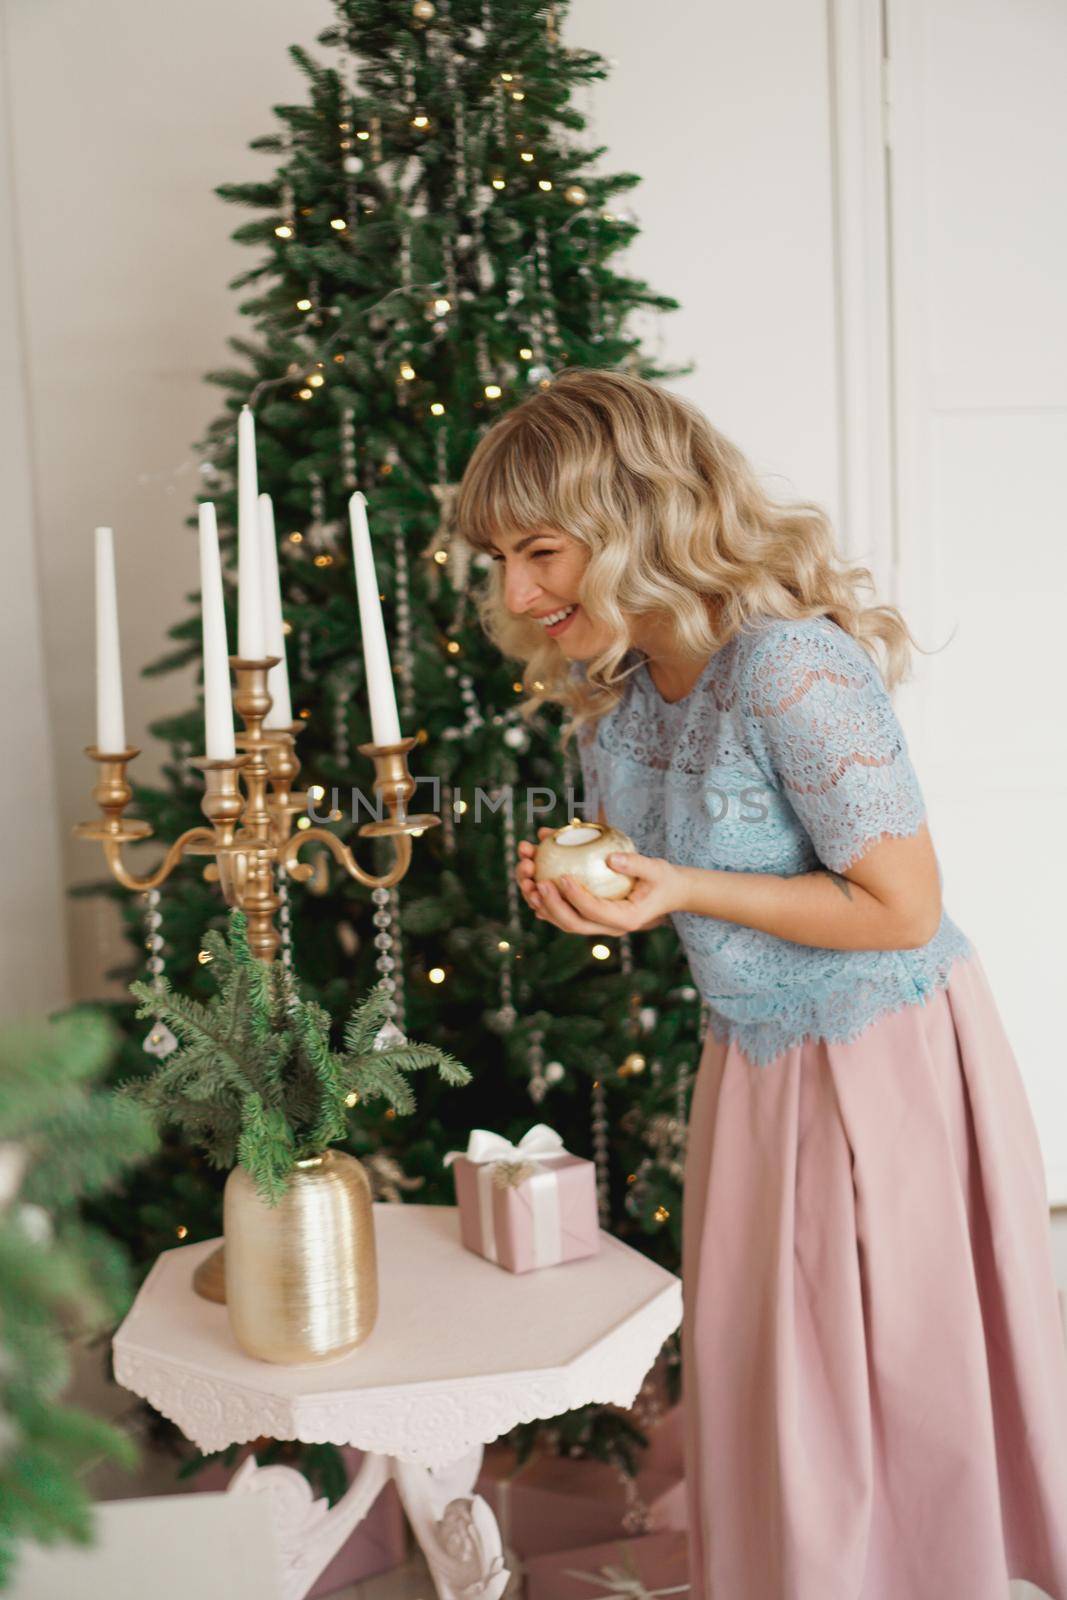 Attractive young woman smiling while holding a candle celebrating Christmas by natali_brill